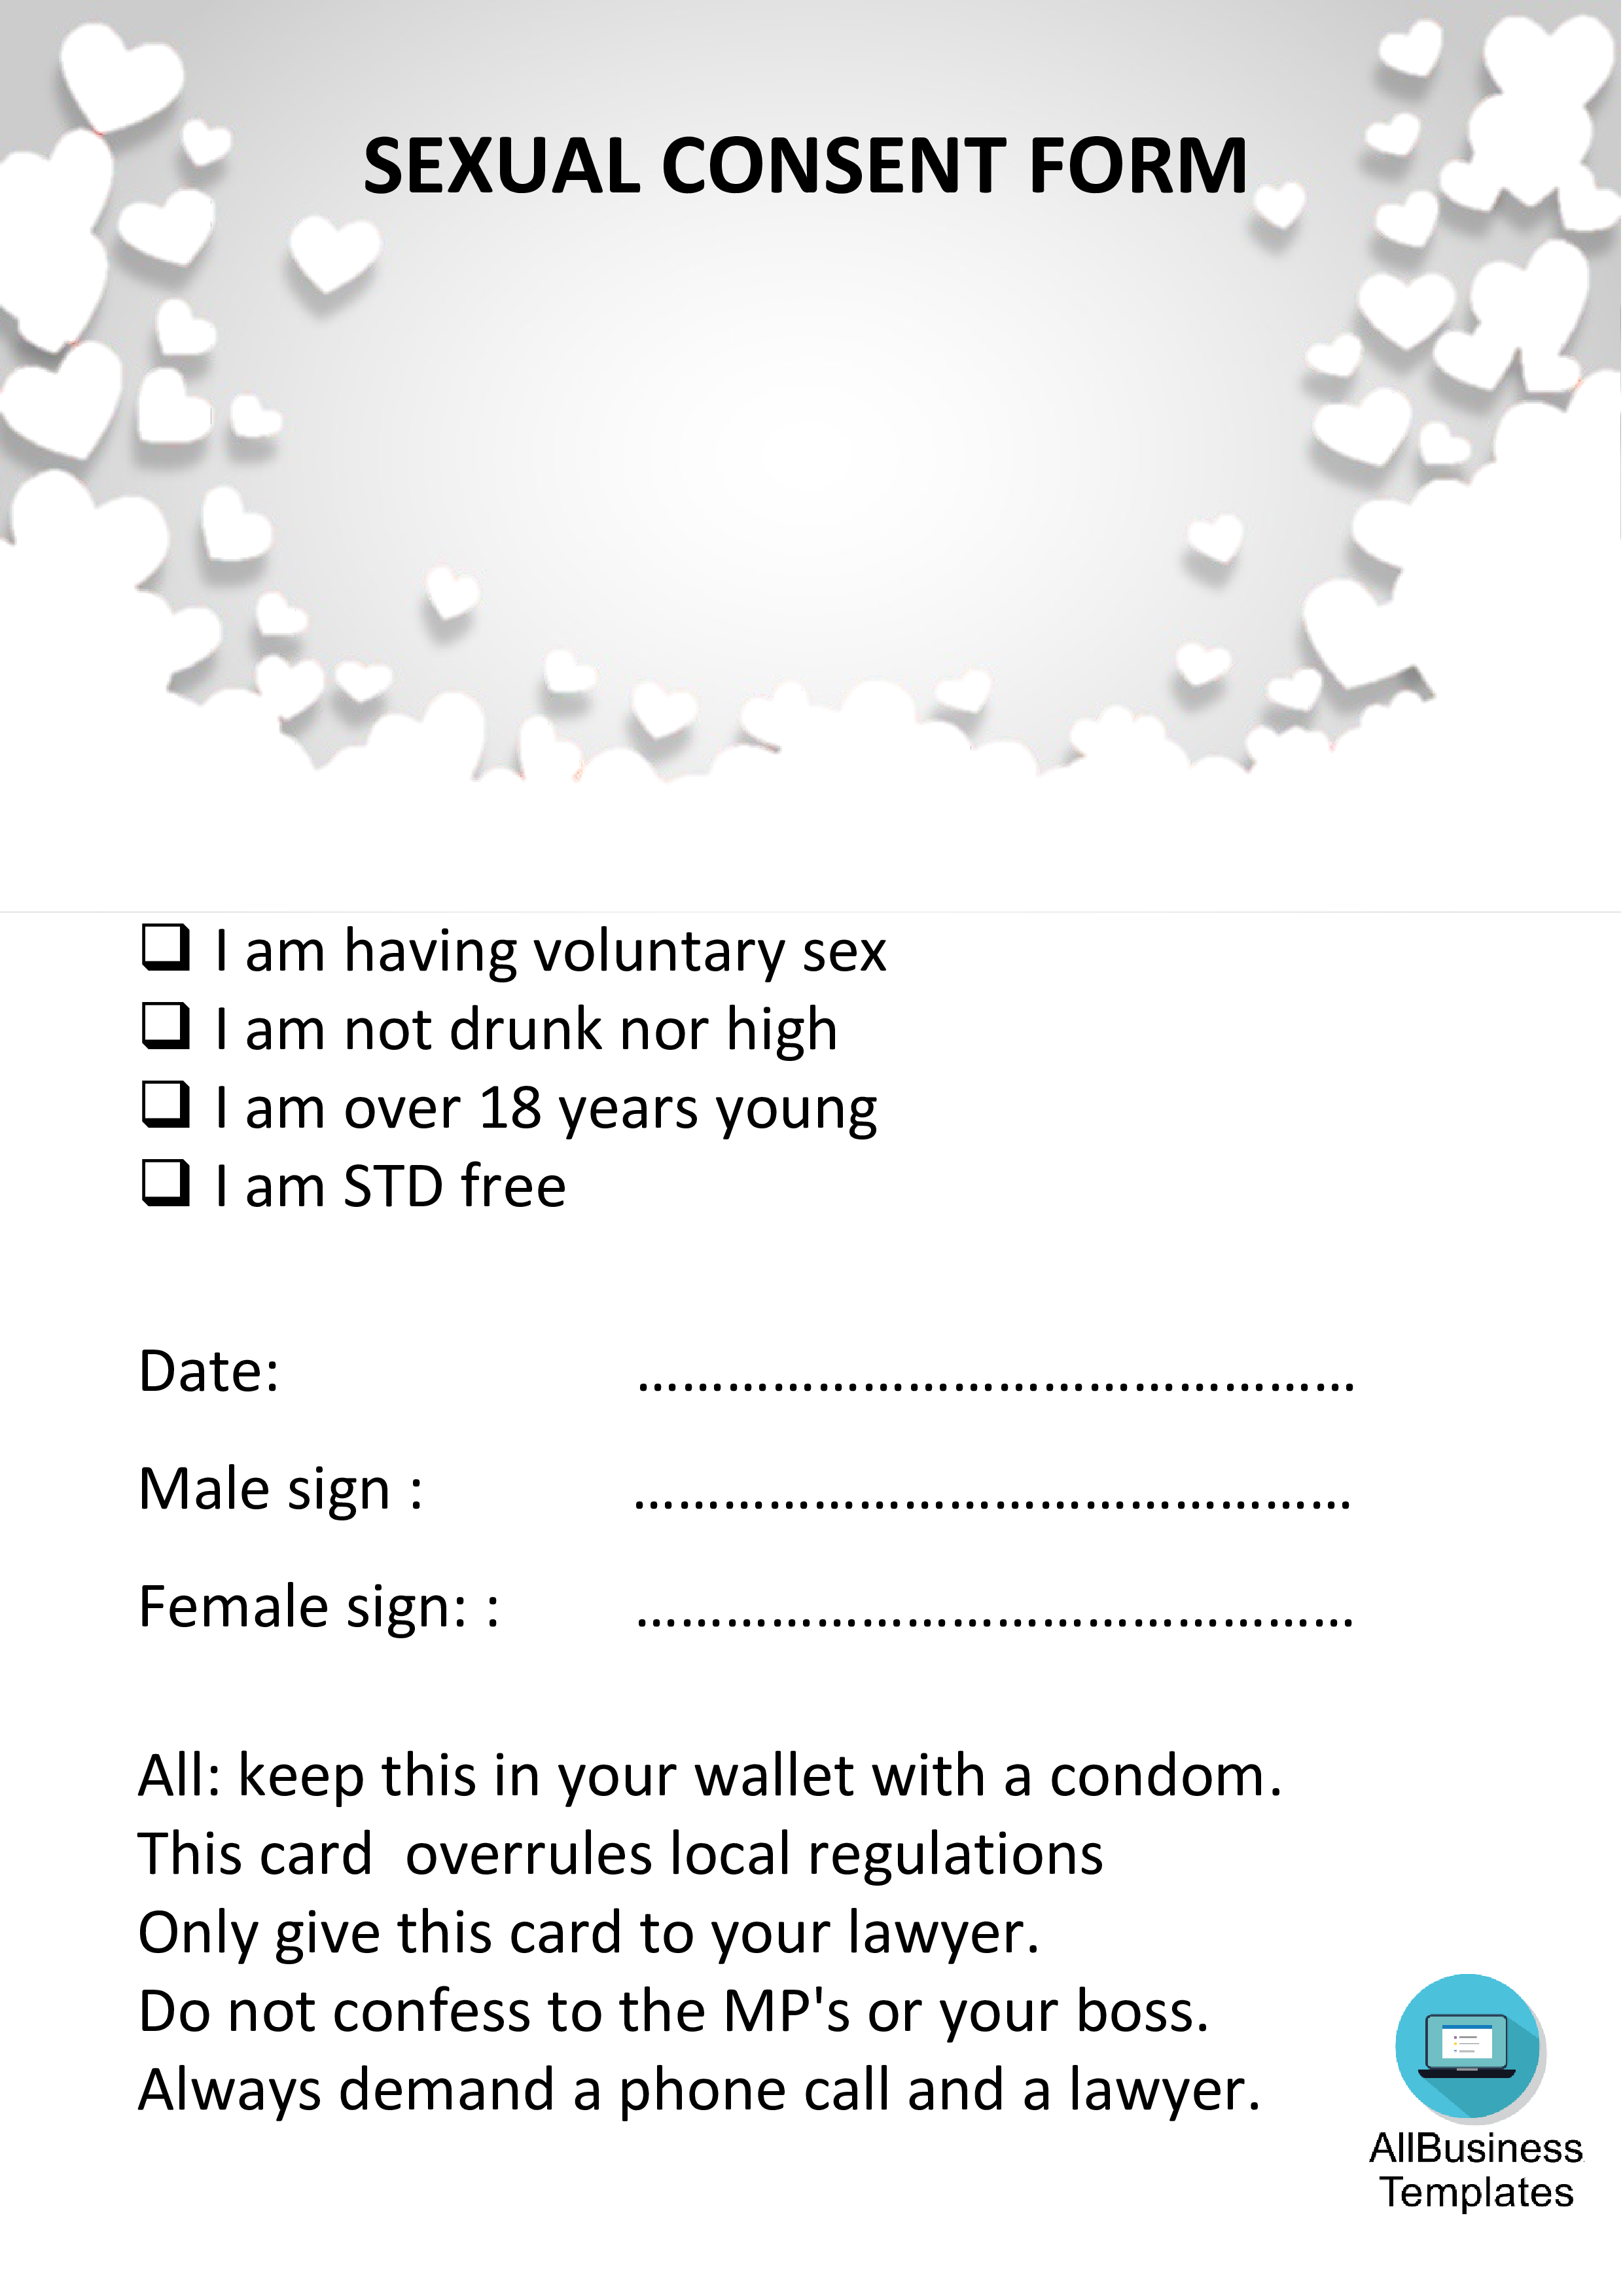 Sexual consent form main image